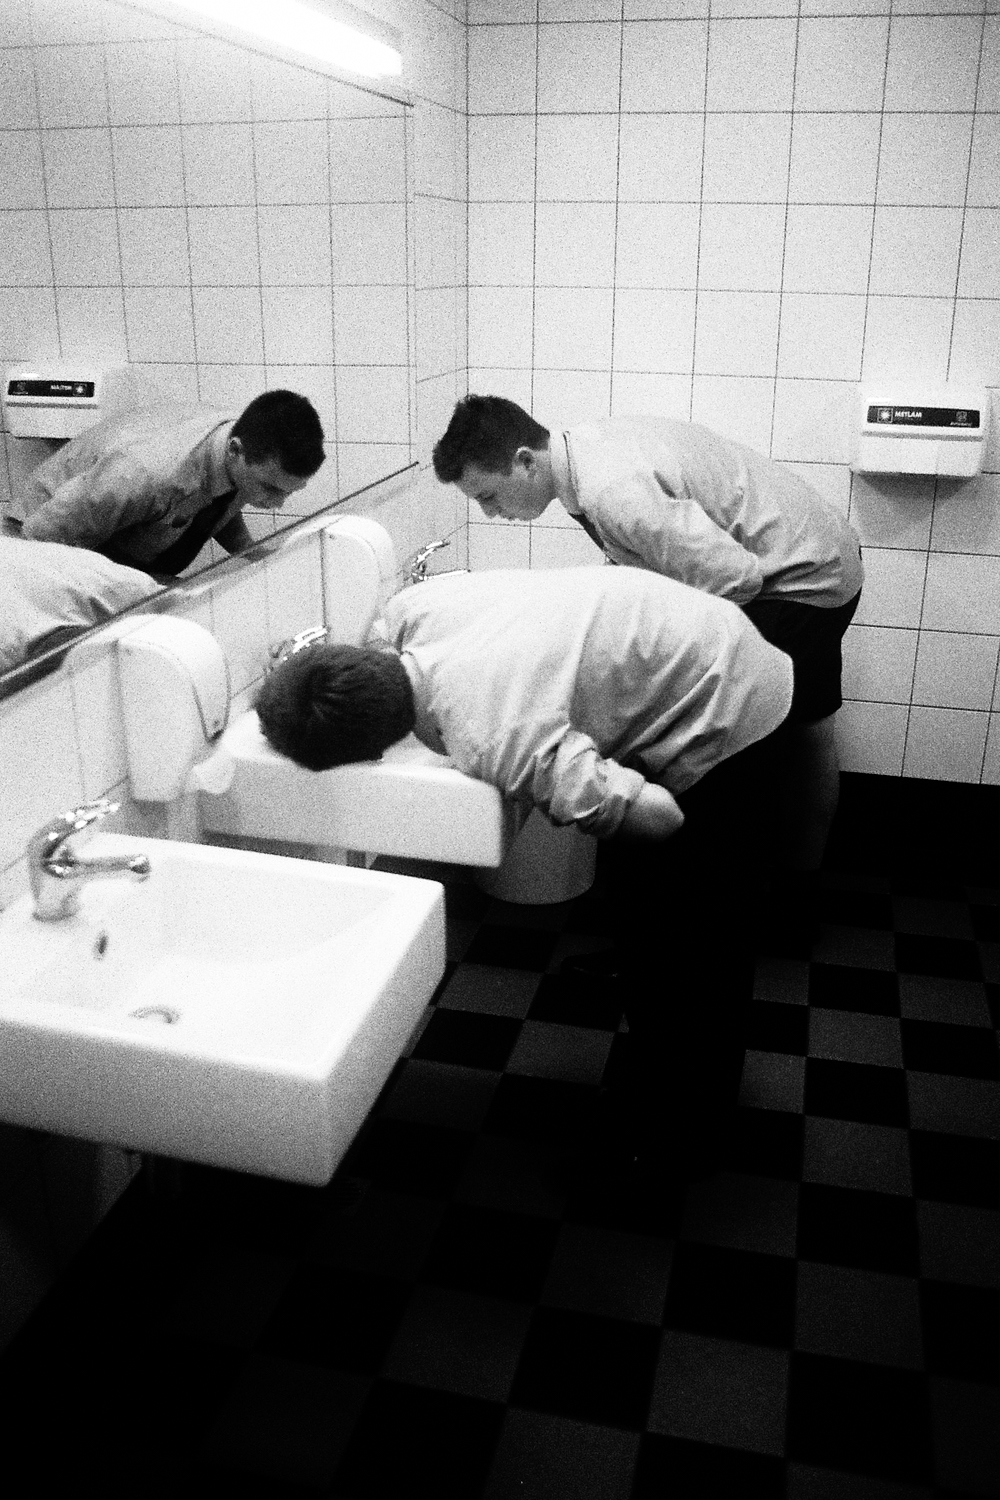  Students drinking from the tap in the CPAC bathroom, 2016 